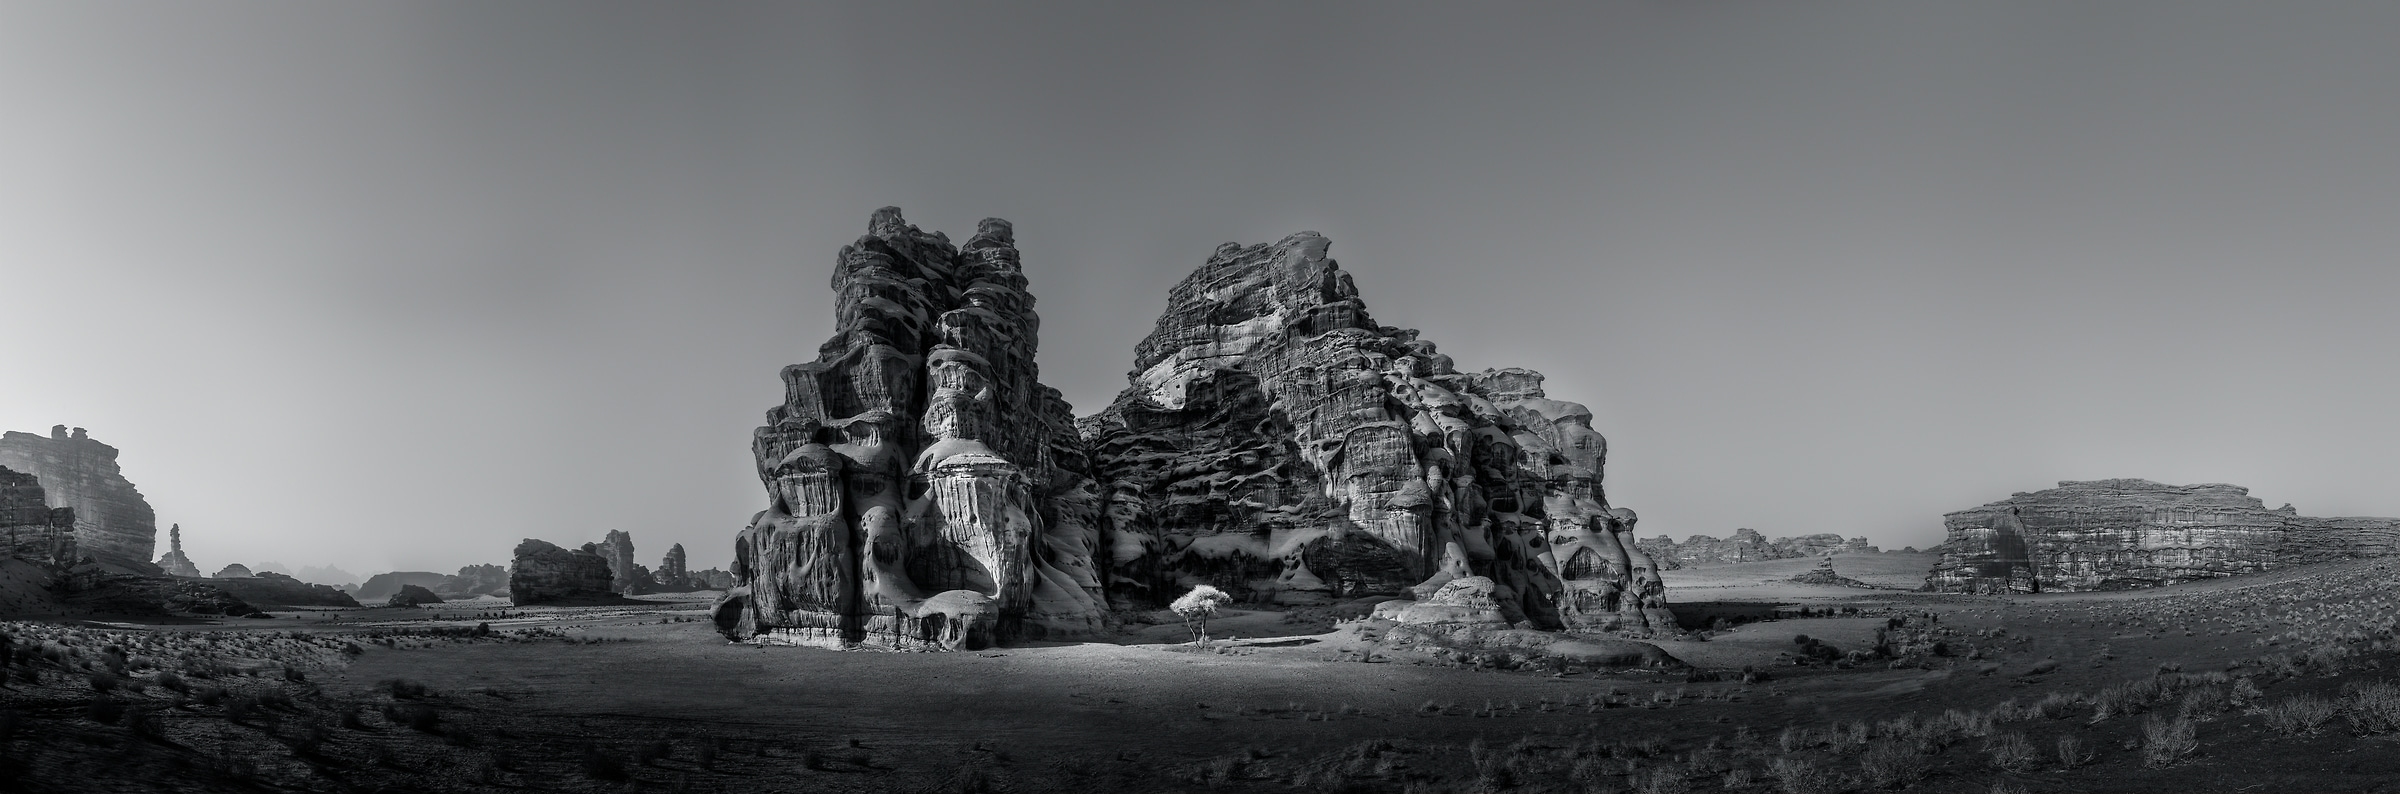 858 megapixels! A very high resolution, large-format VAST photo print of a surreal landscape; black & white photograph created by Peter Rodger in Tabuk, Saudi Arabia